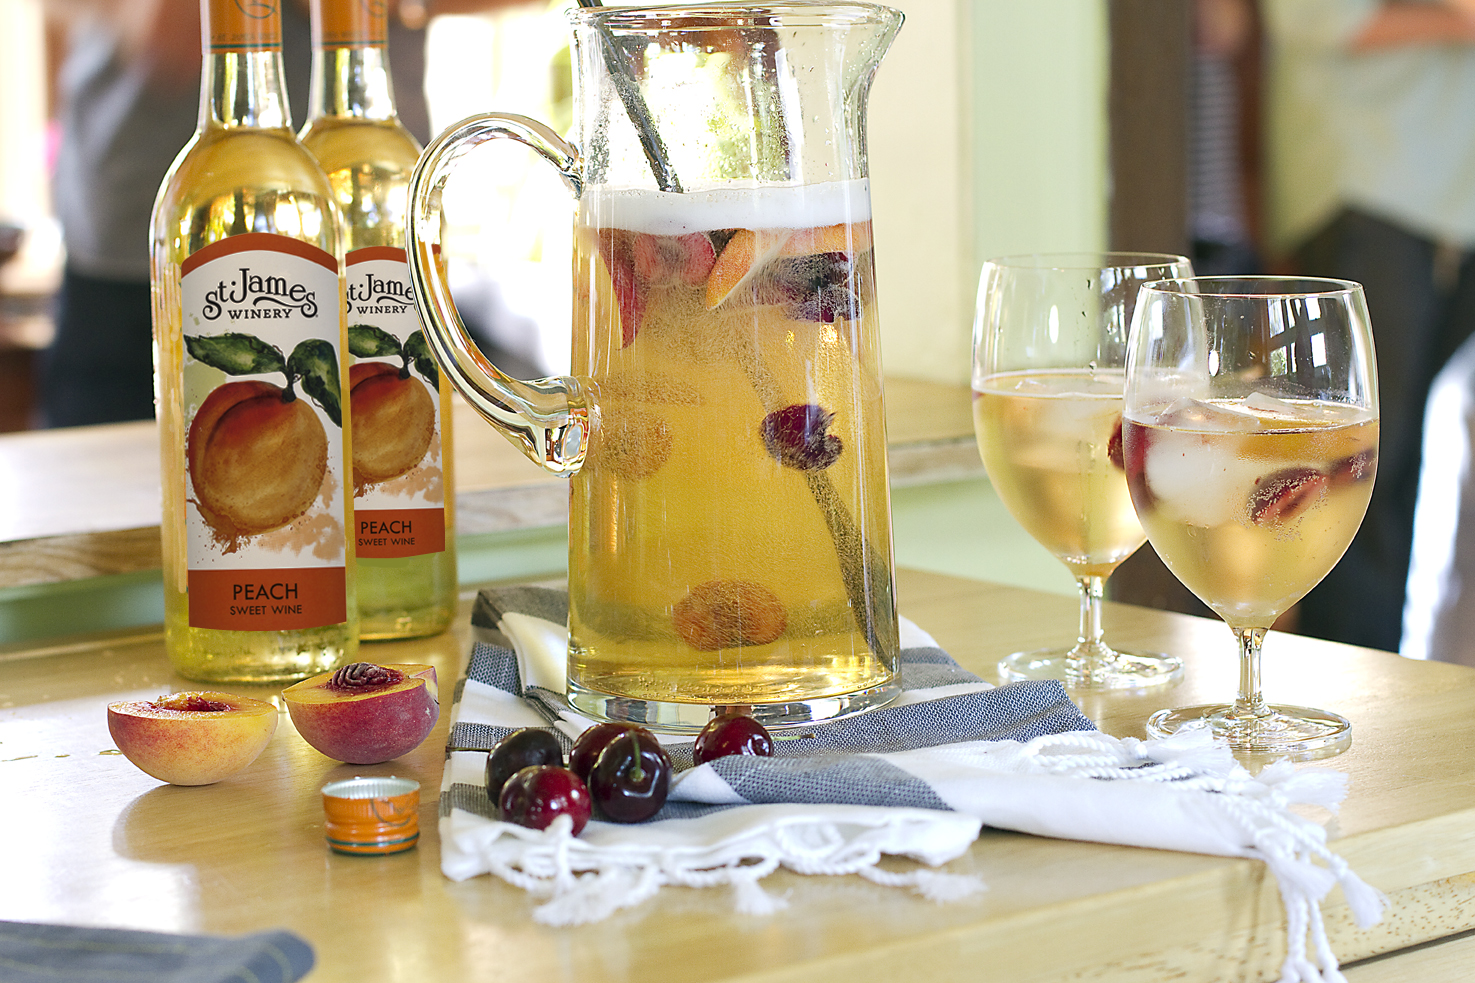 St. James Winery- A jug, two bottles, and two wine glasses filled with peach fruit wine.